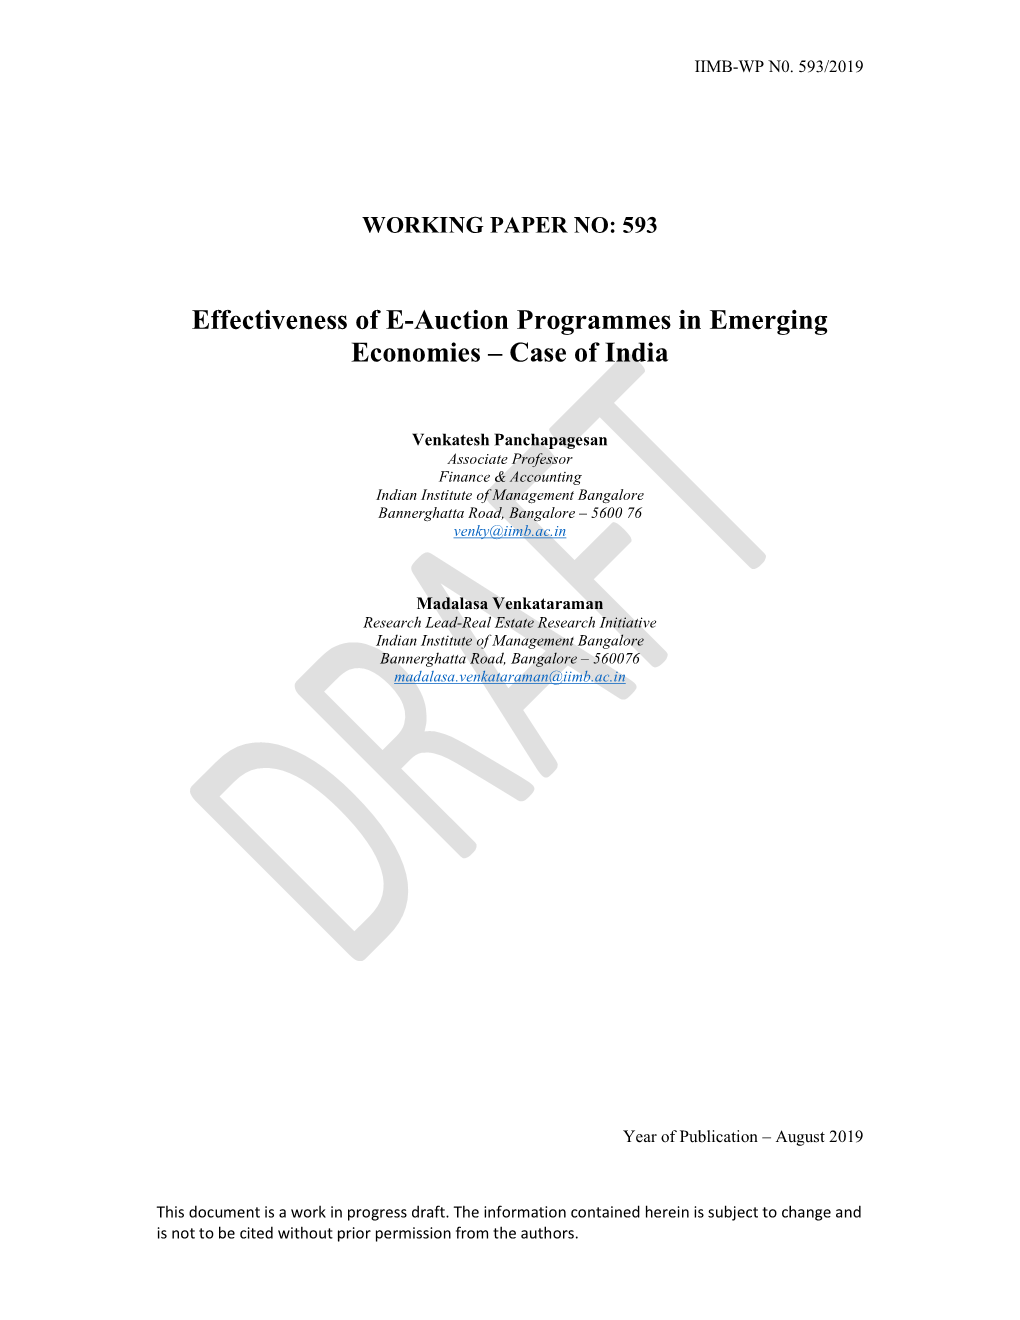 Effectiveness of E-Auction Programmes in Emerging Economies – Case of India